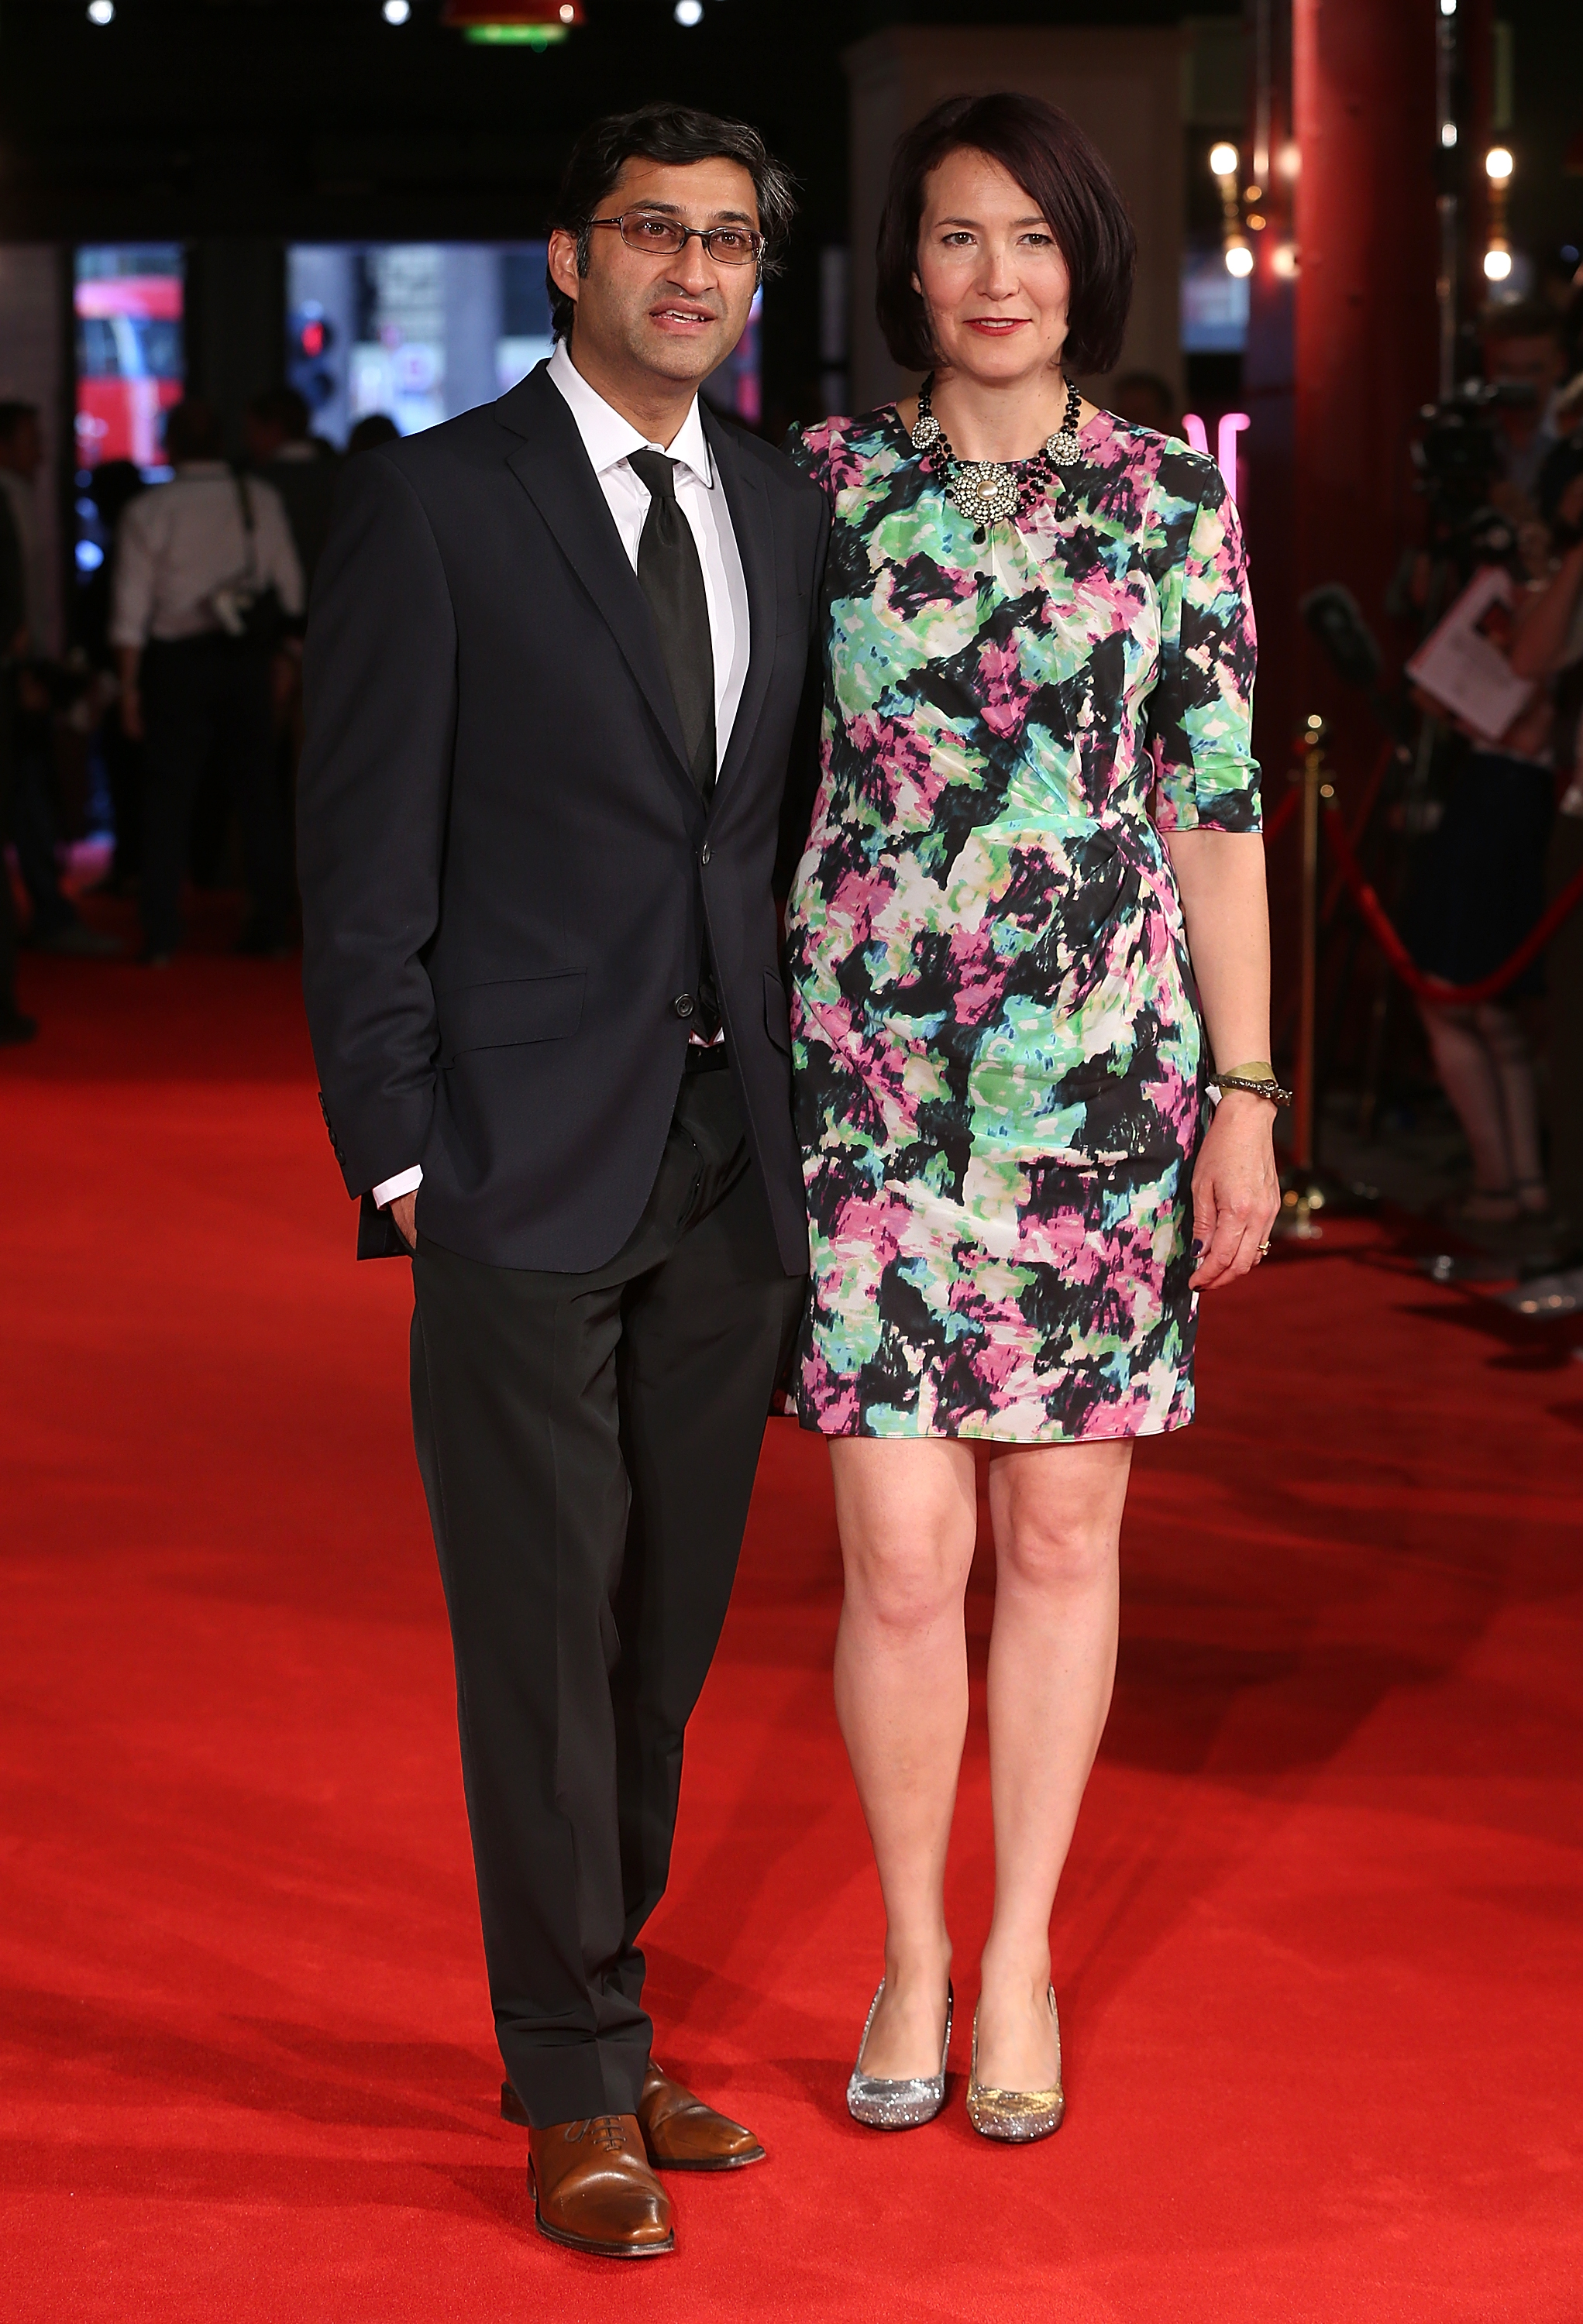 Asif Kapadia and hiswife Victoria Kapadia at the premiere of "Amy" in London in 2015 | Source: Getty Images